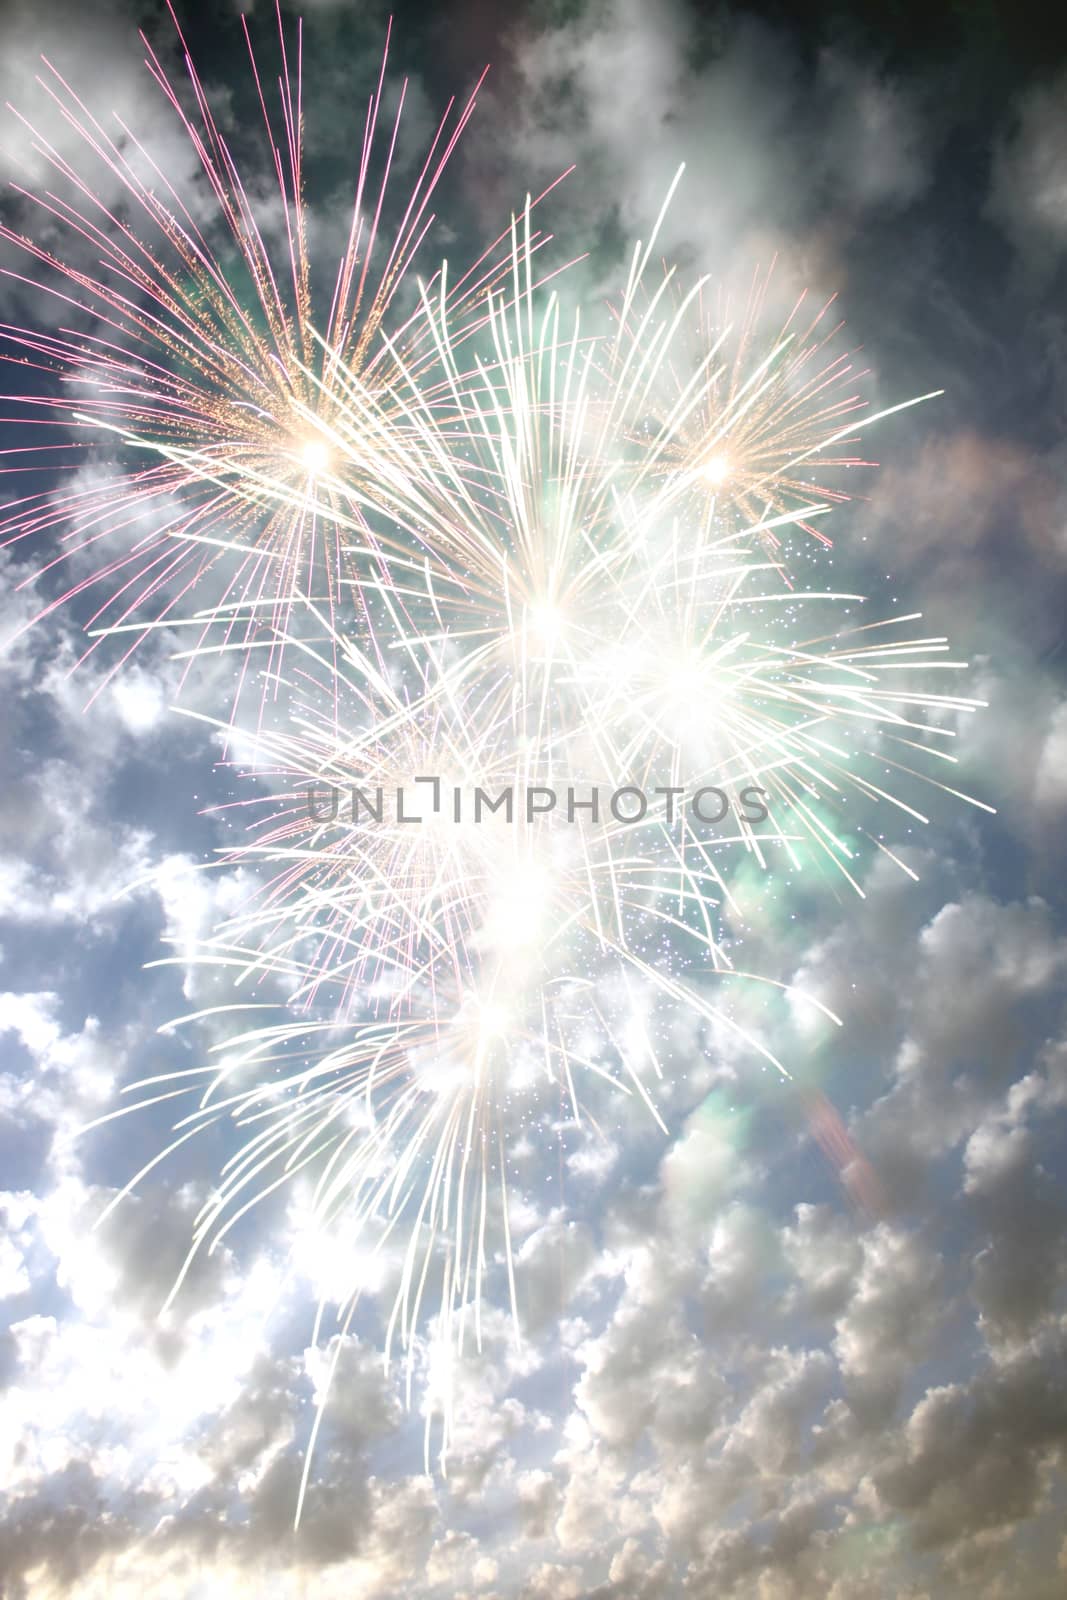 Fireworks exploding on the backdrop of a cloudy sky, during day time.